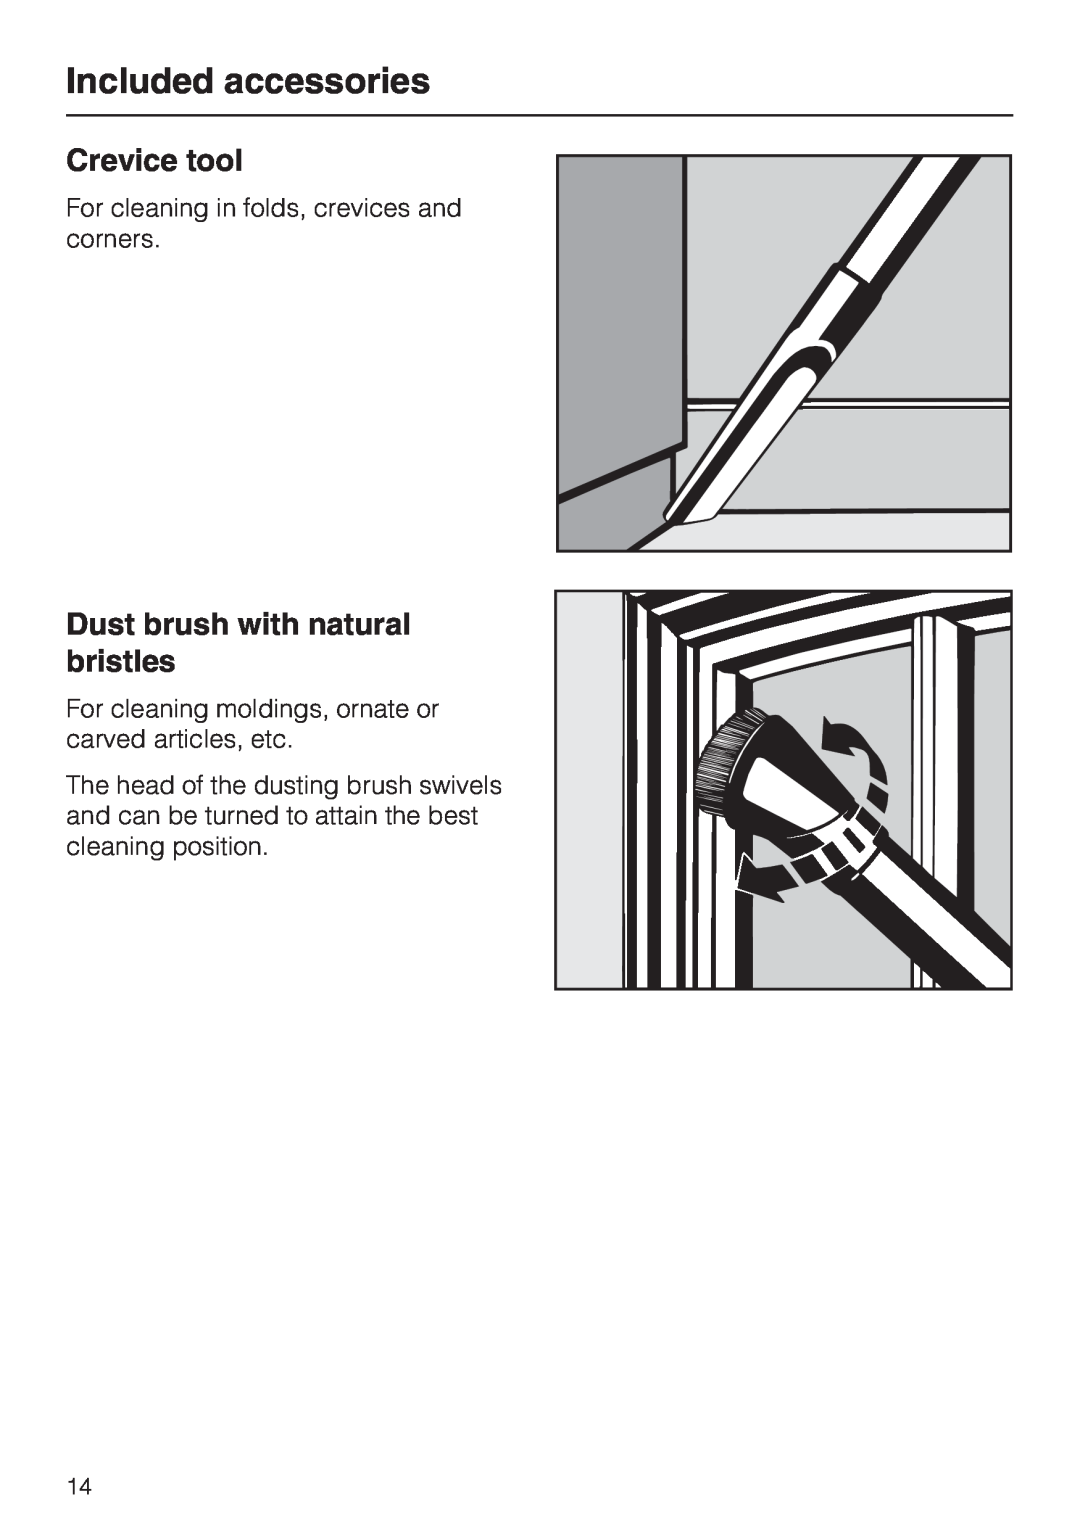 NEC S 5000 operating instructions Crevice tool, Dust brush with natural bristles, Included accessories 